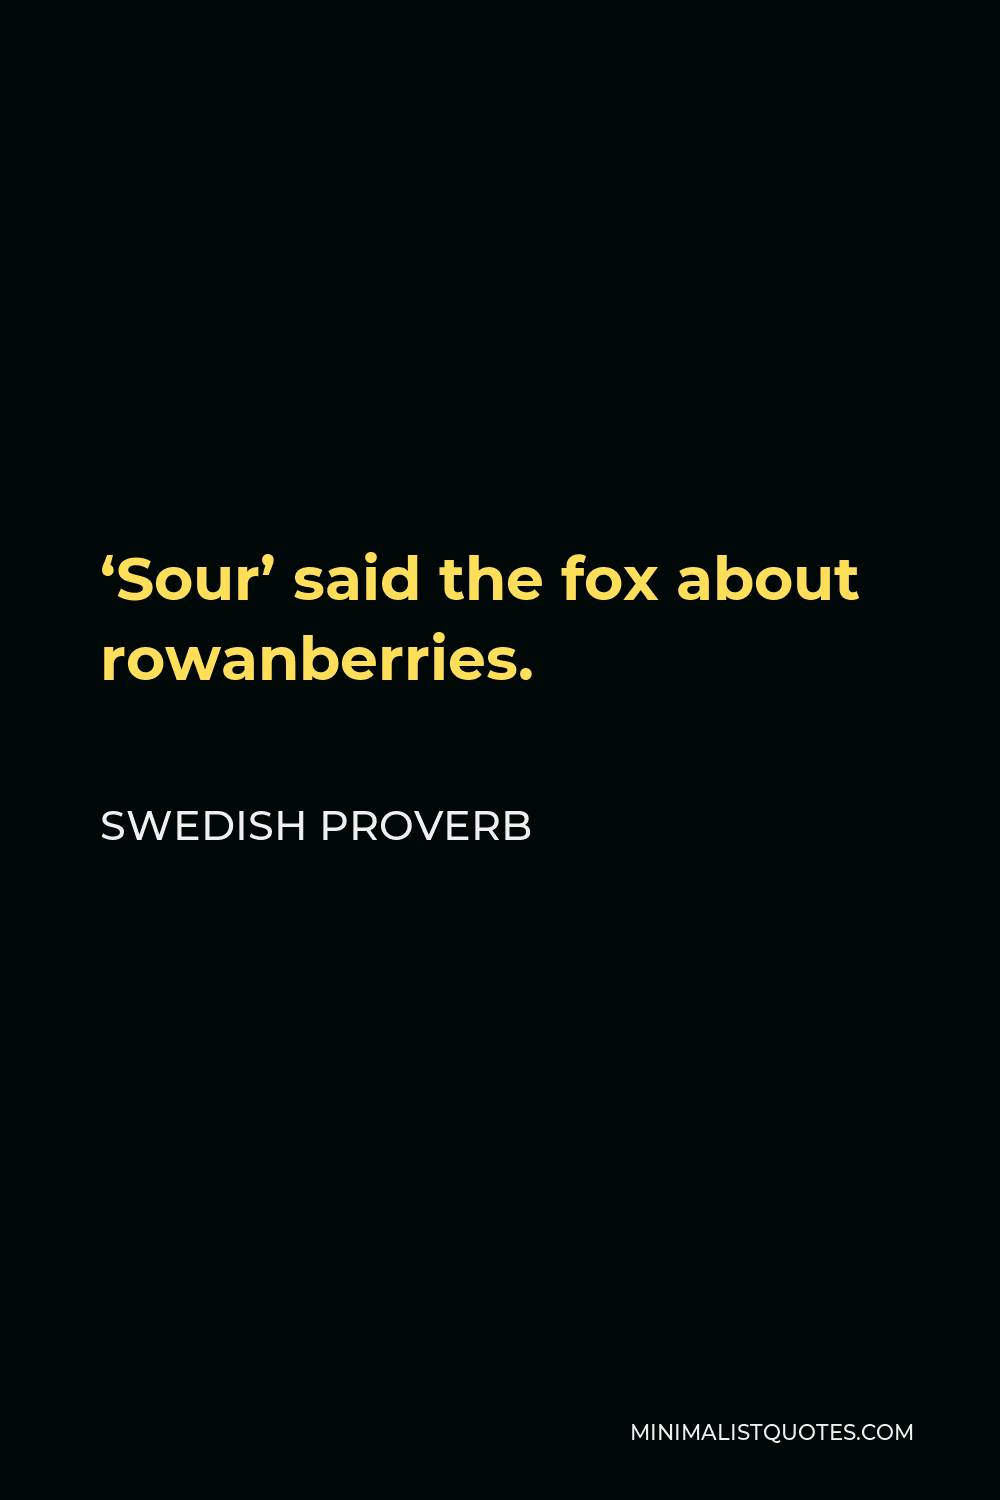 Swedish Proverb Quote - ‘Sour’ said the fox about rowanberries.